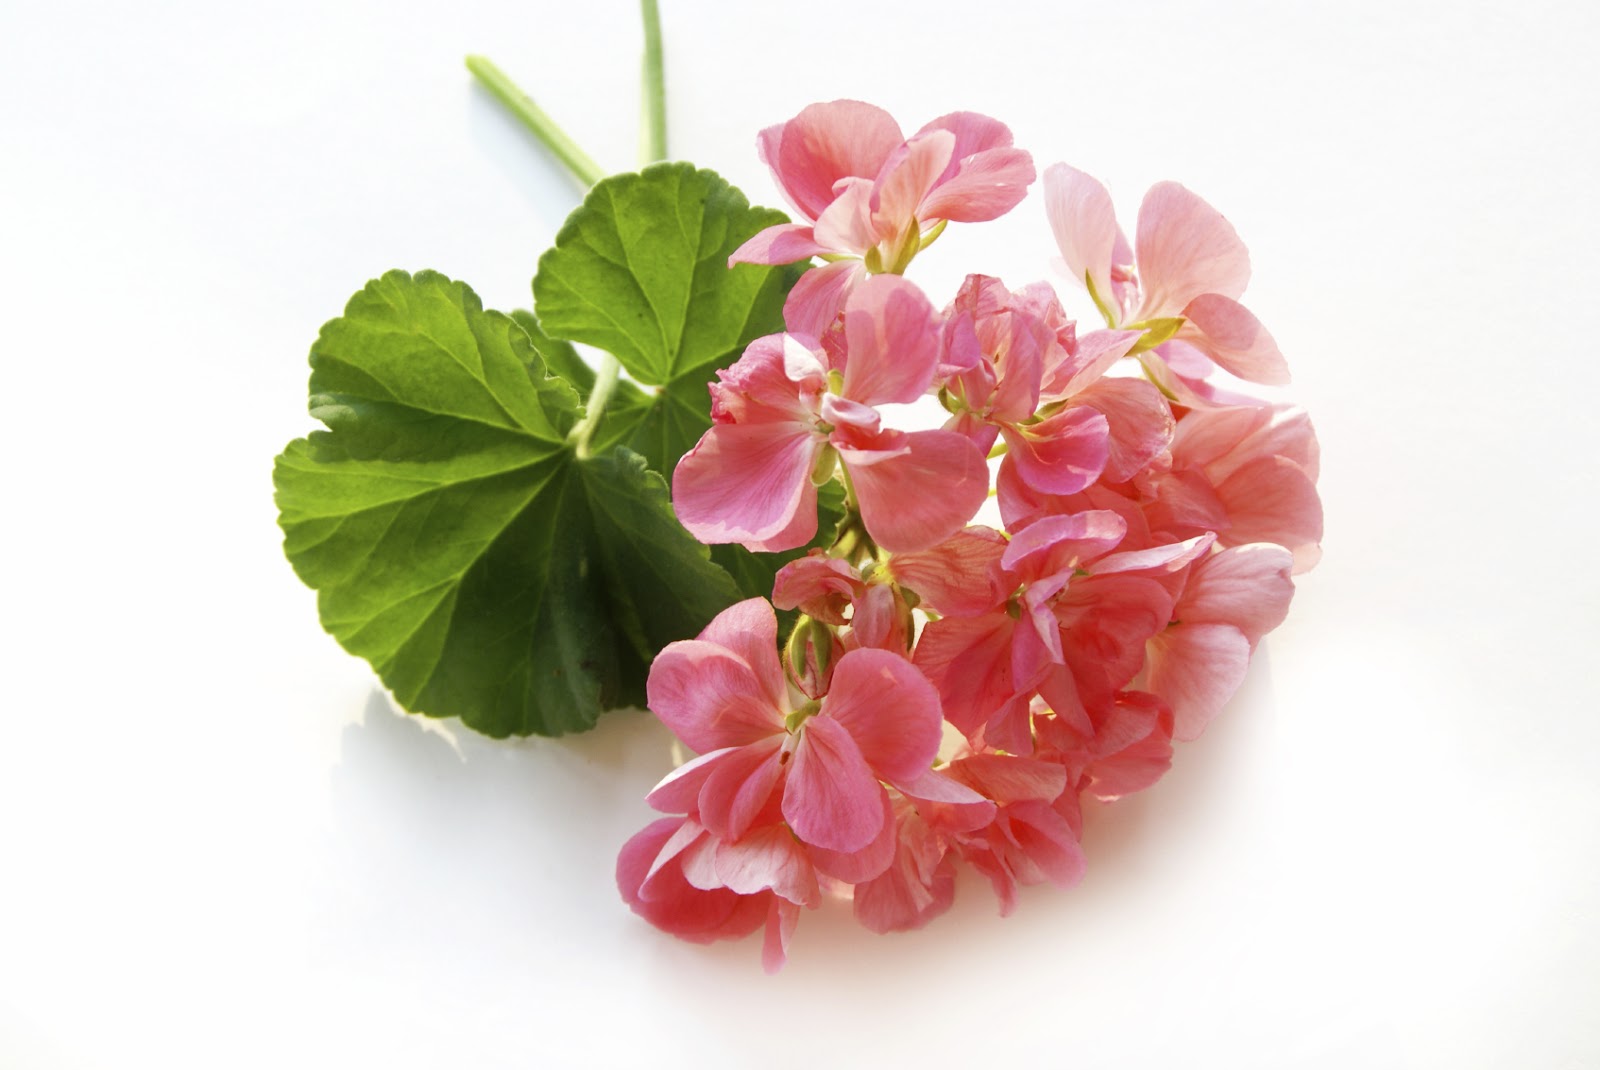 You will learn to immediately recognize the distinctive, one-of-a-kind aroma of Organic Rose Geranium Essential Oil.